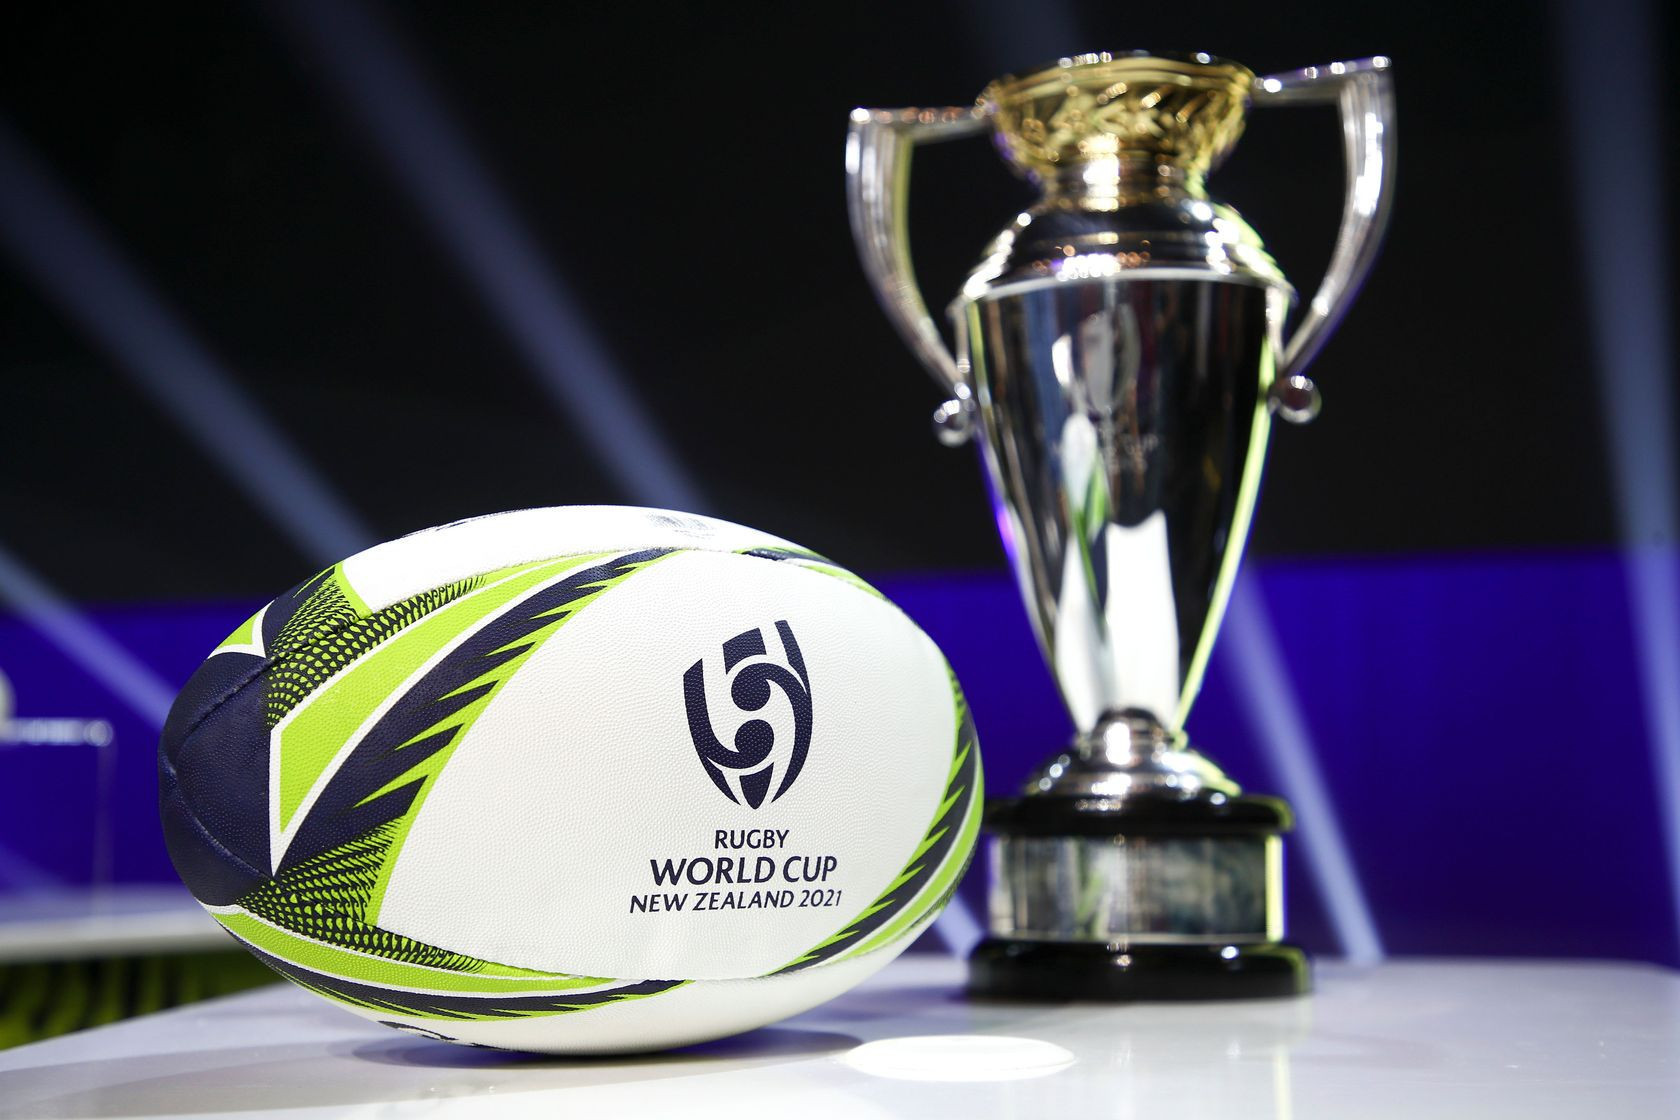 Scotland, Kazakhstan and Colombia chase last women's Rugby World Cup berth